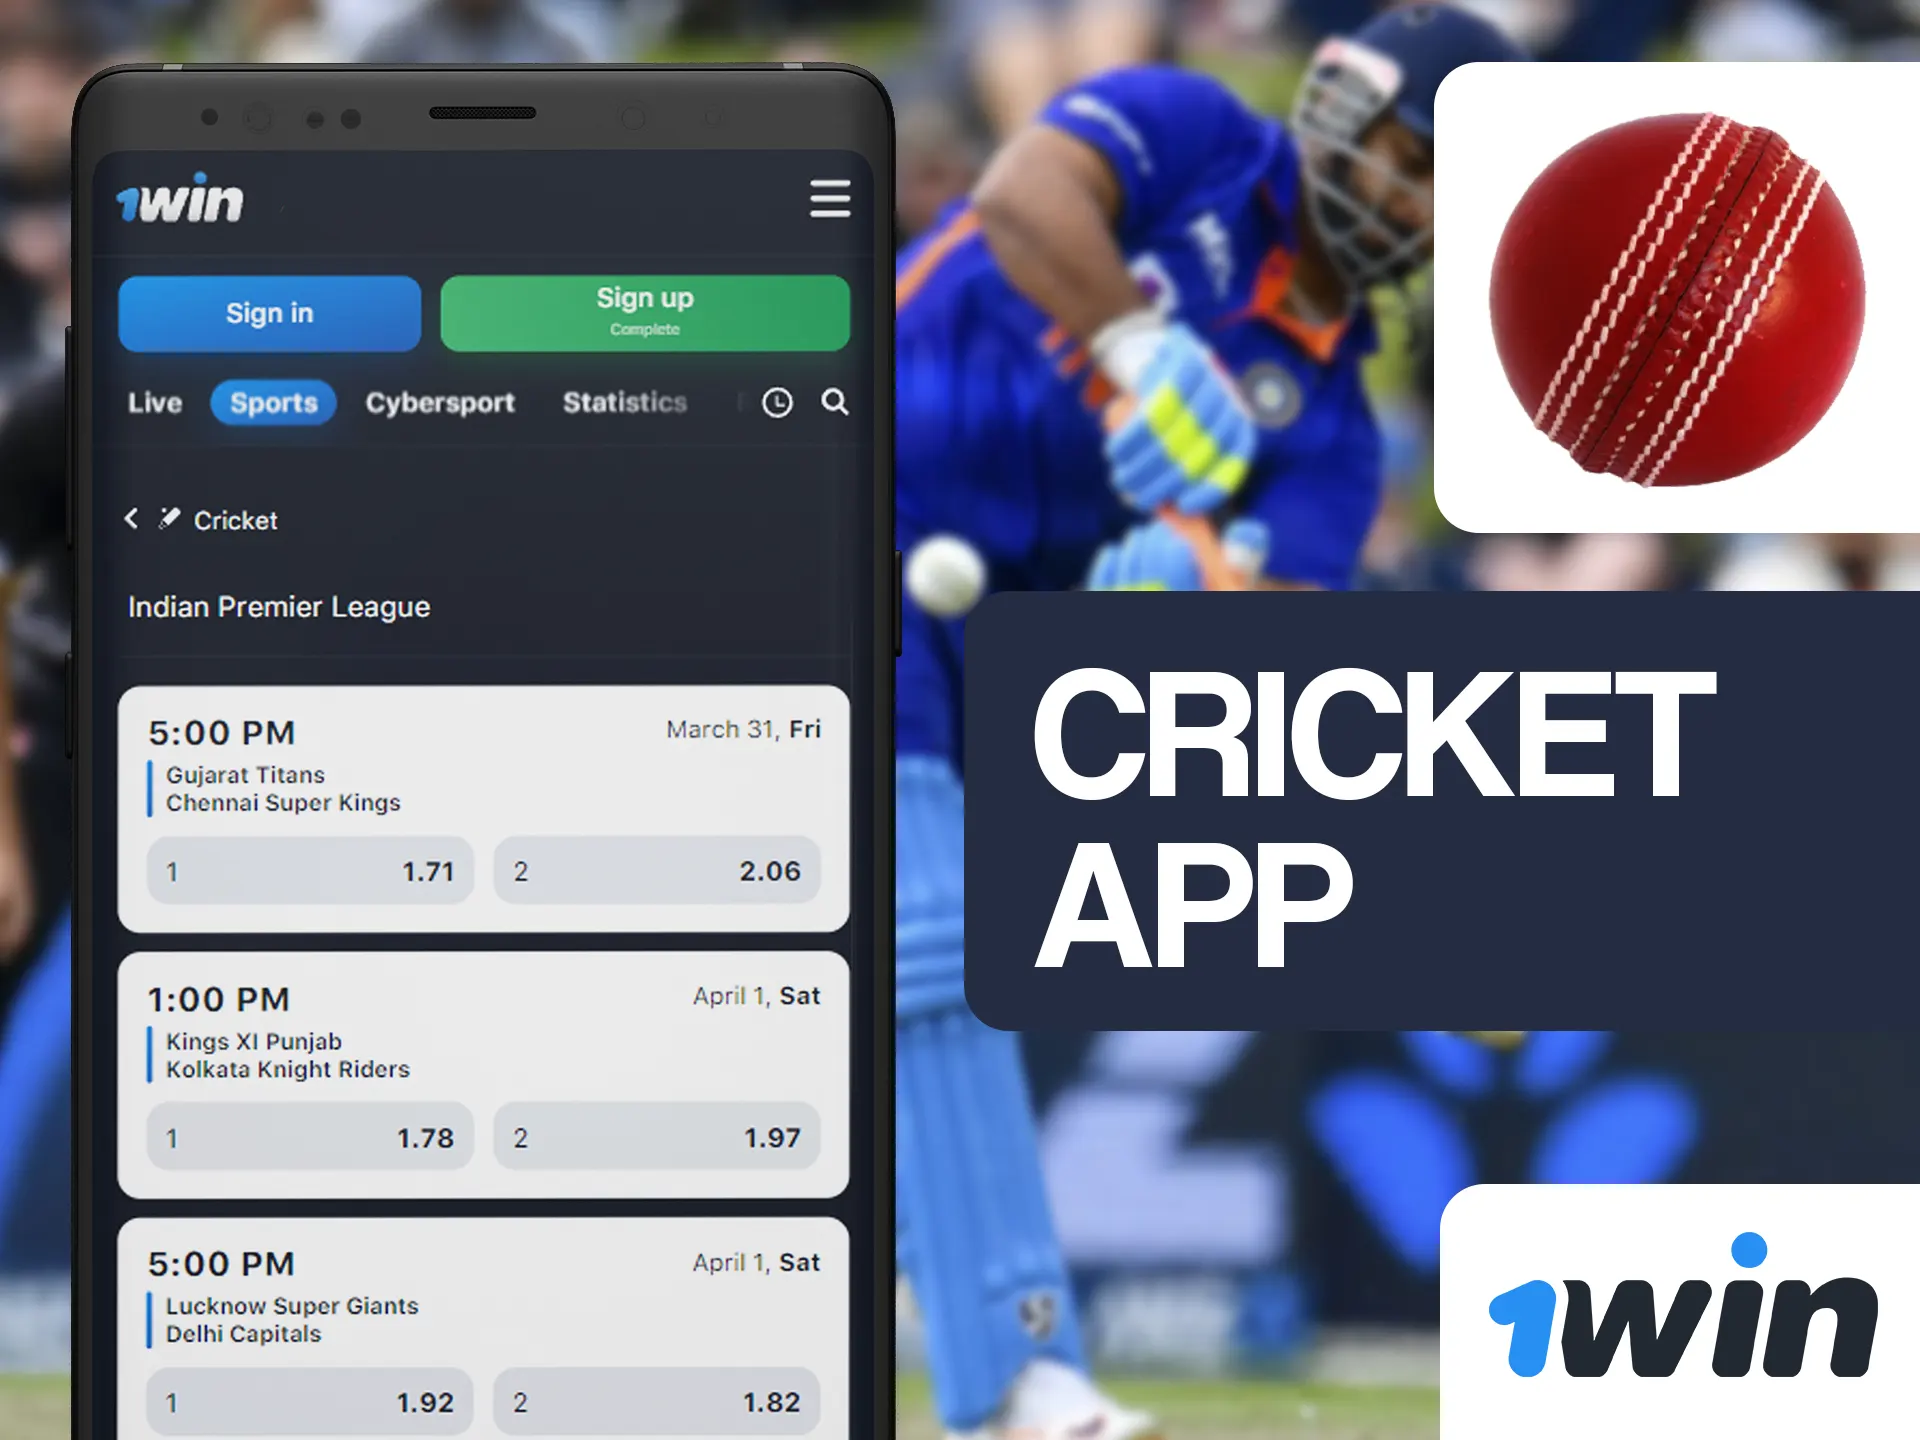 Win money by betting on your favourite cricket team at 1win.